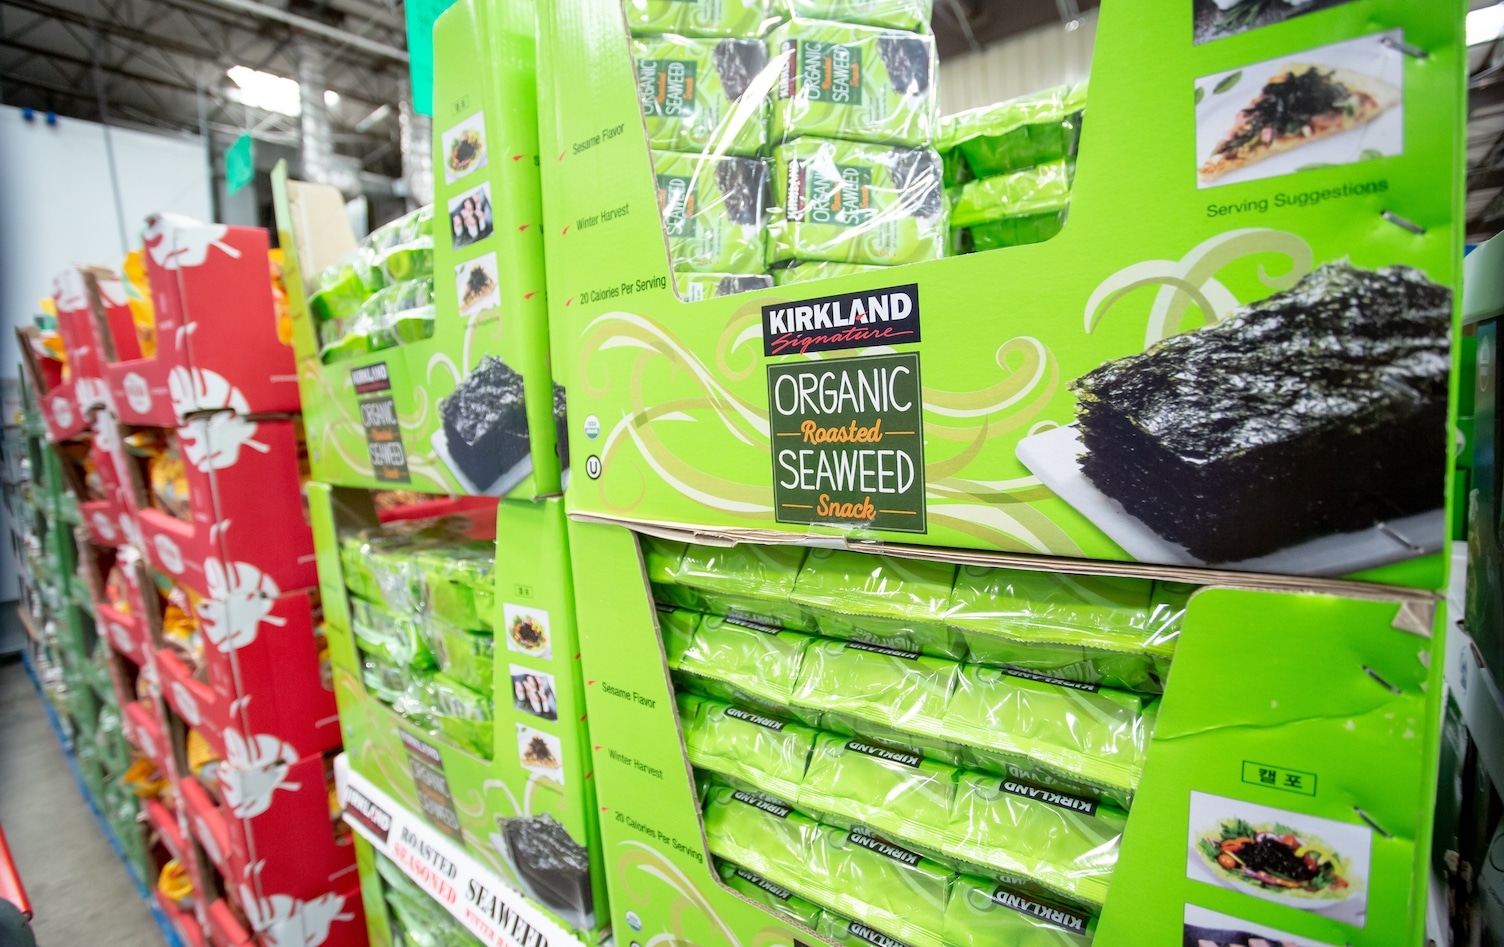 10 of the Best Low-Carb Foods at Costco You Need To Know | MyFitnessPal